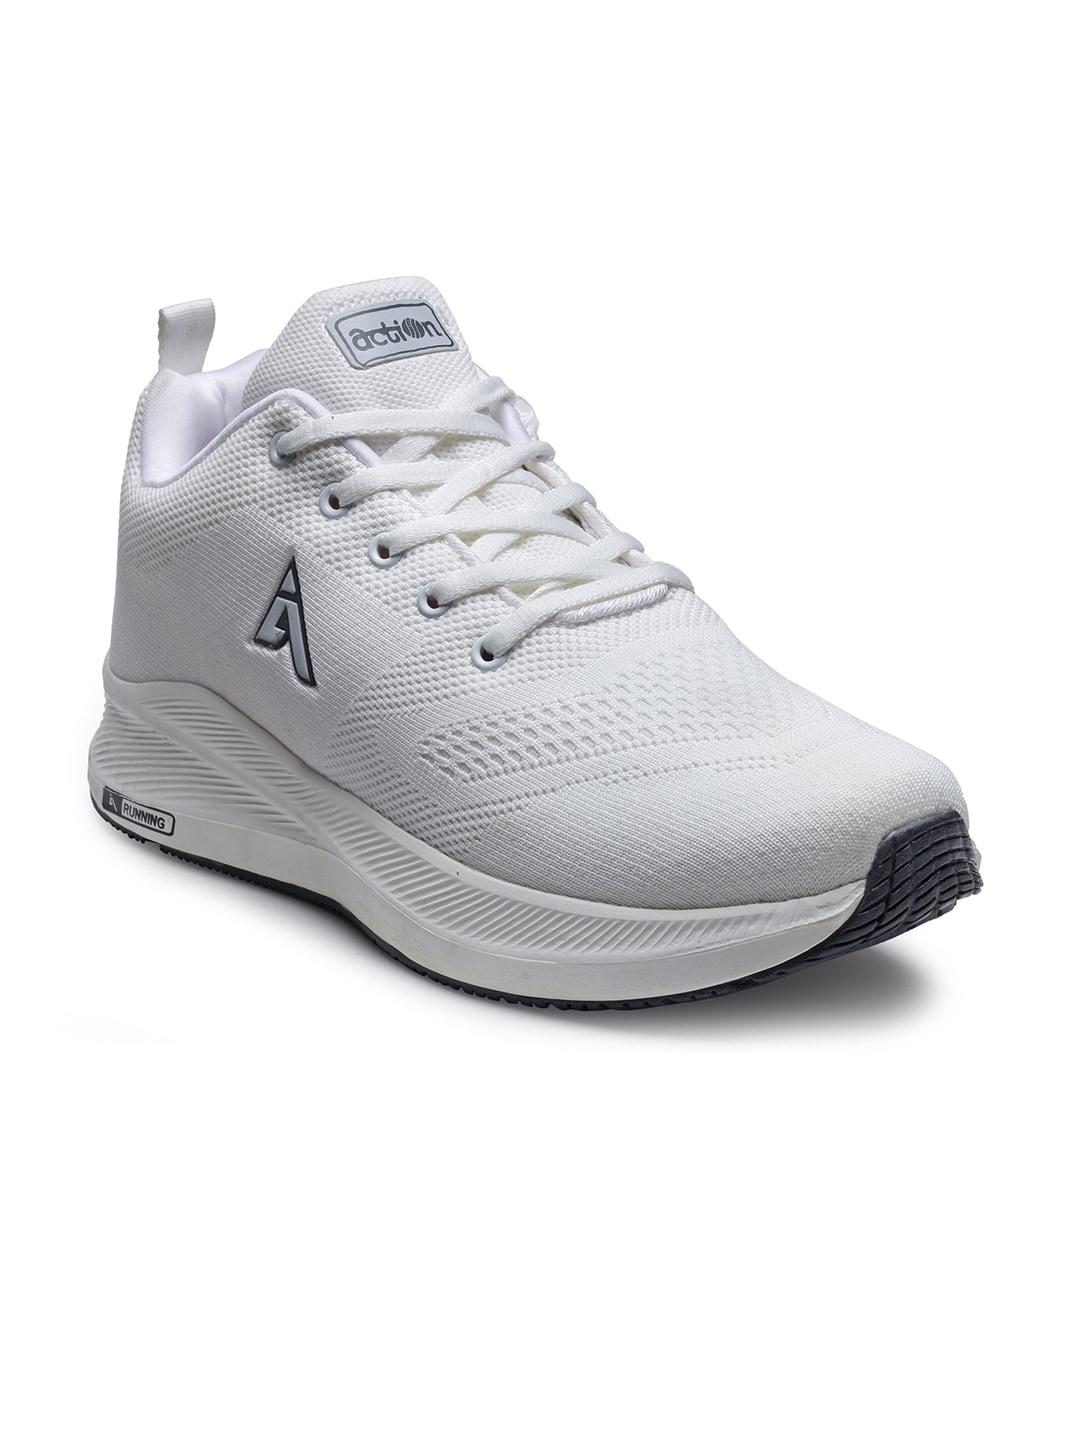 Action Men White Mesh Running Non-Marking Lace-Ups Shoes